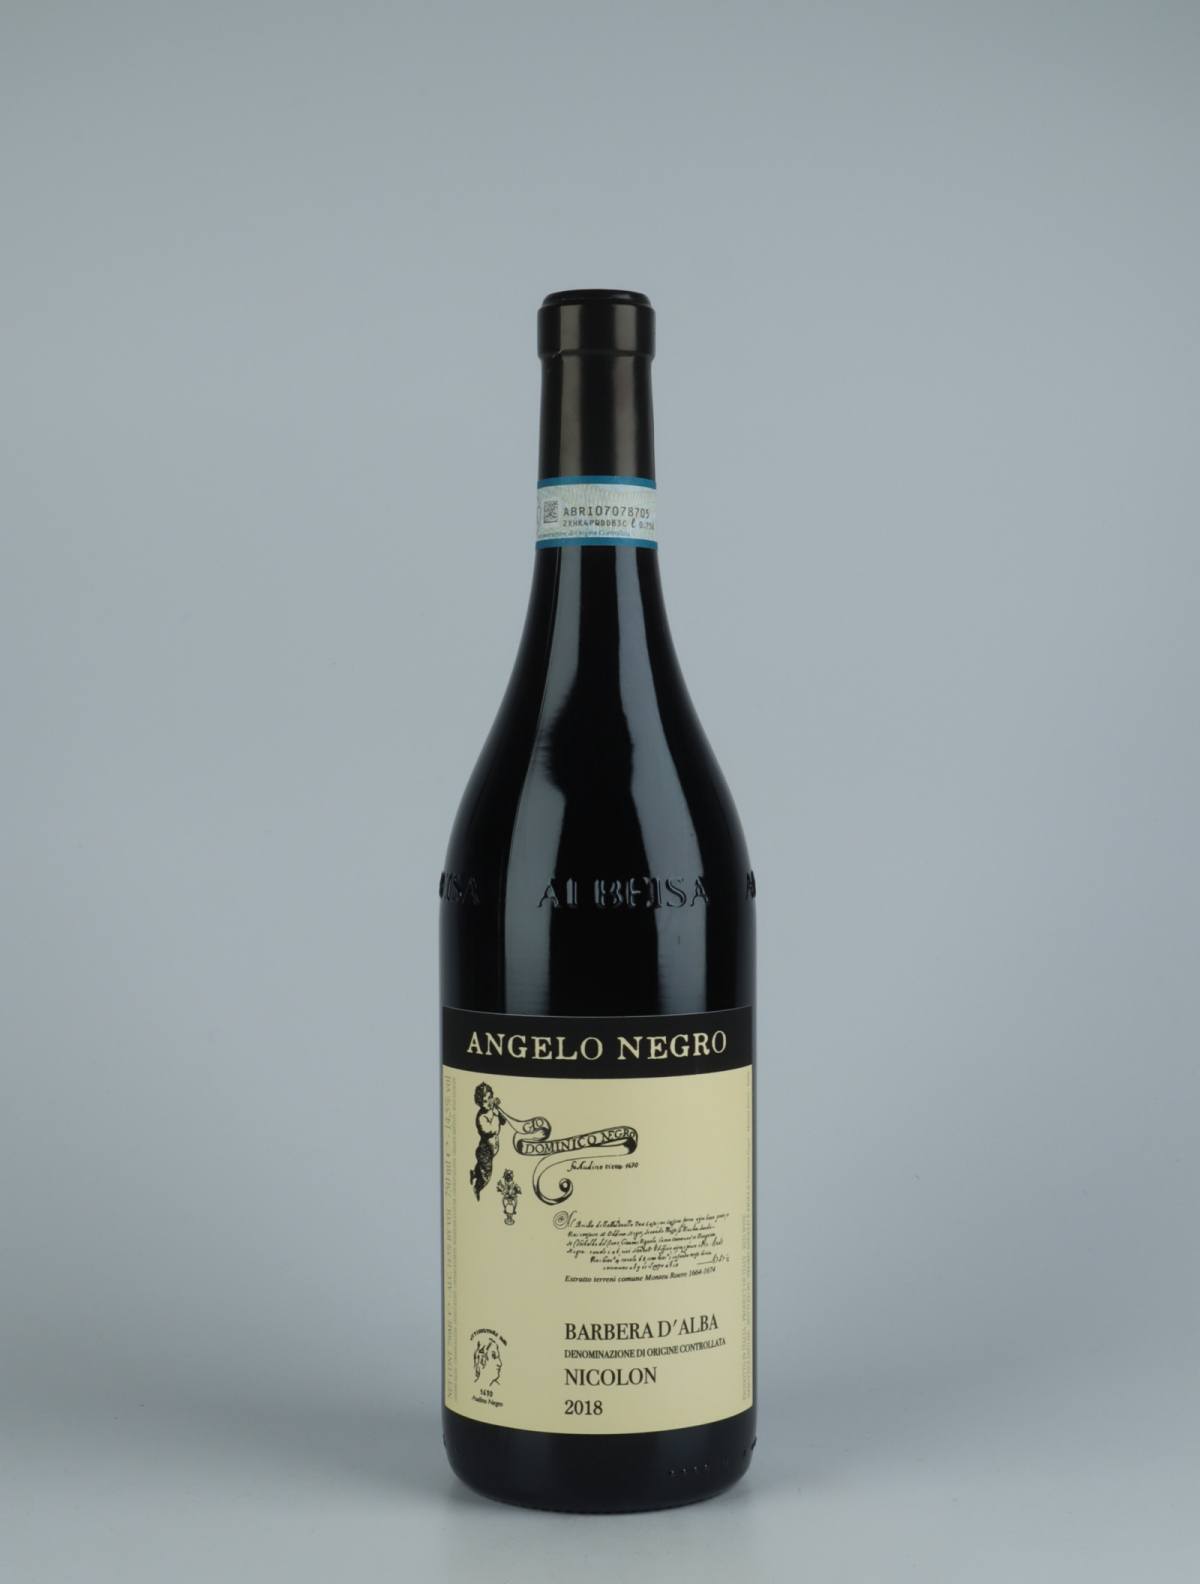 A bottle 2018 Barbera d'Alba - Nicolon Red wine from Angelo Negro, Piedmont in Italy